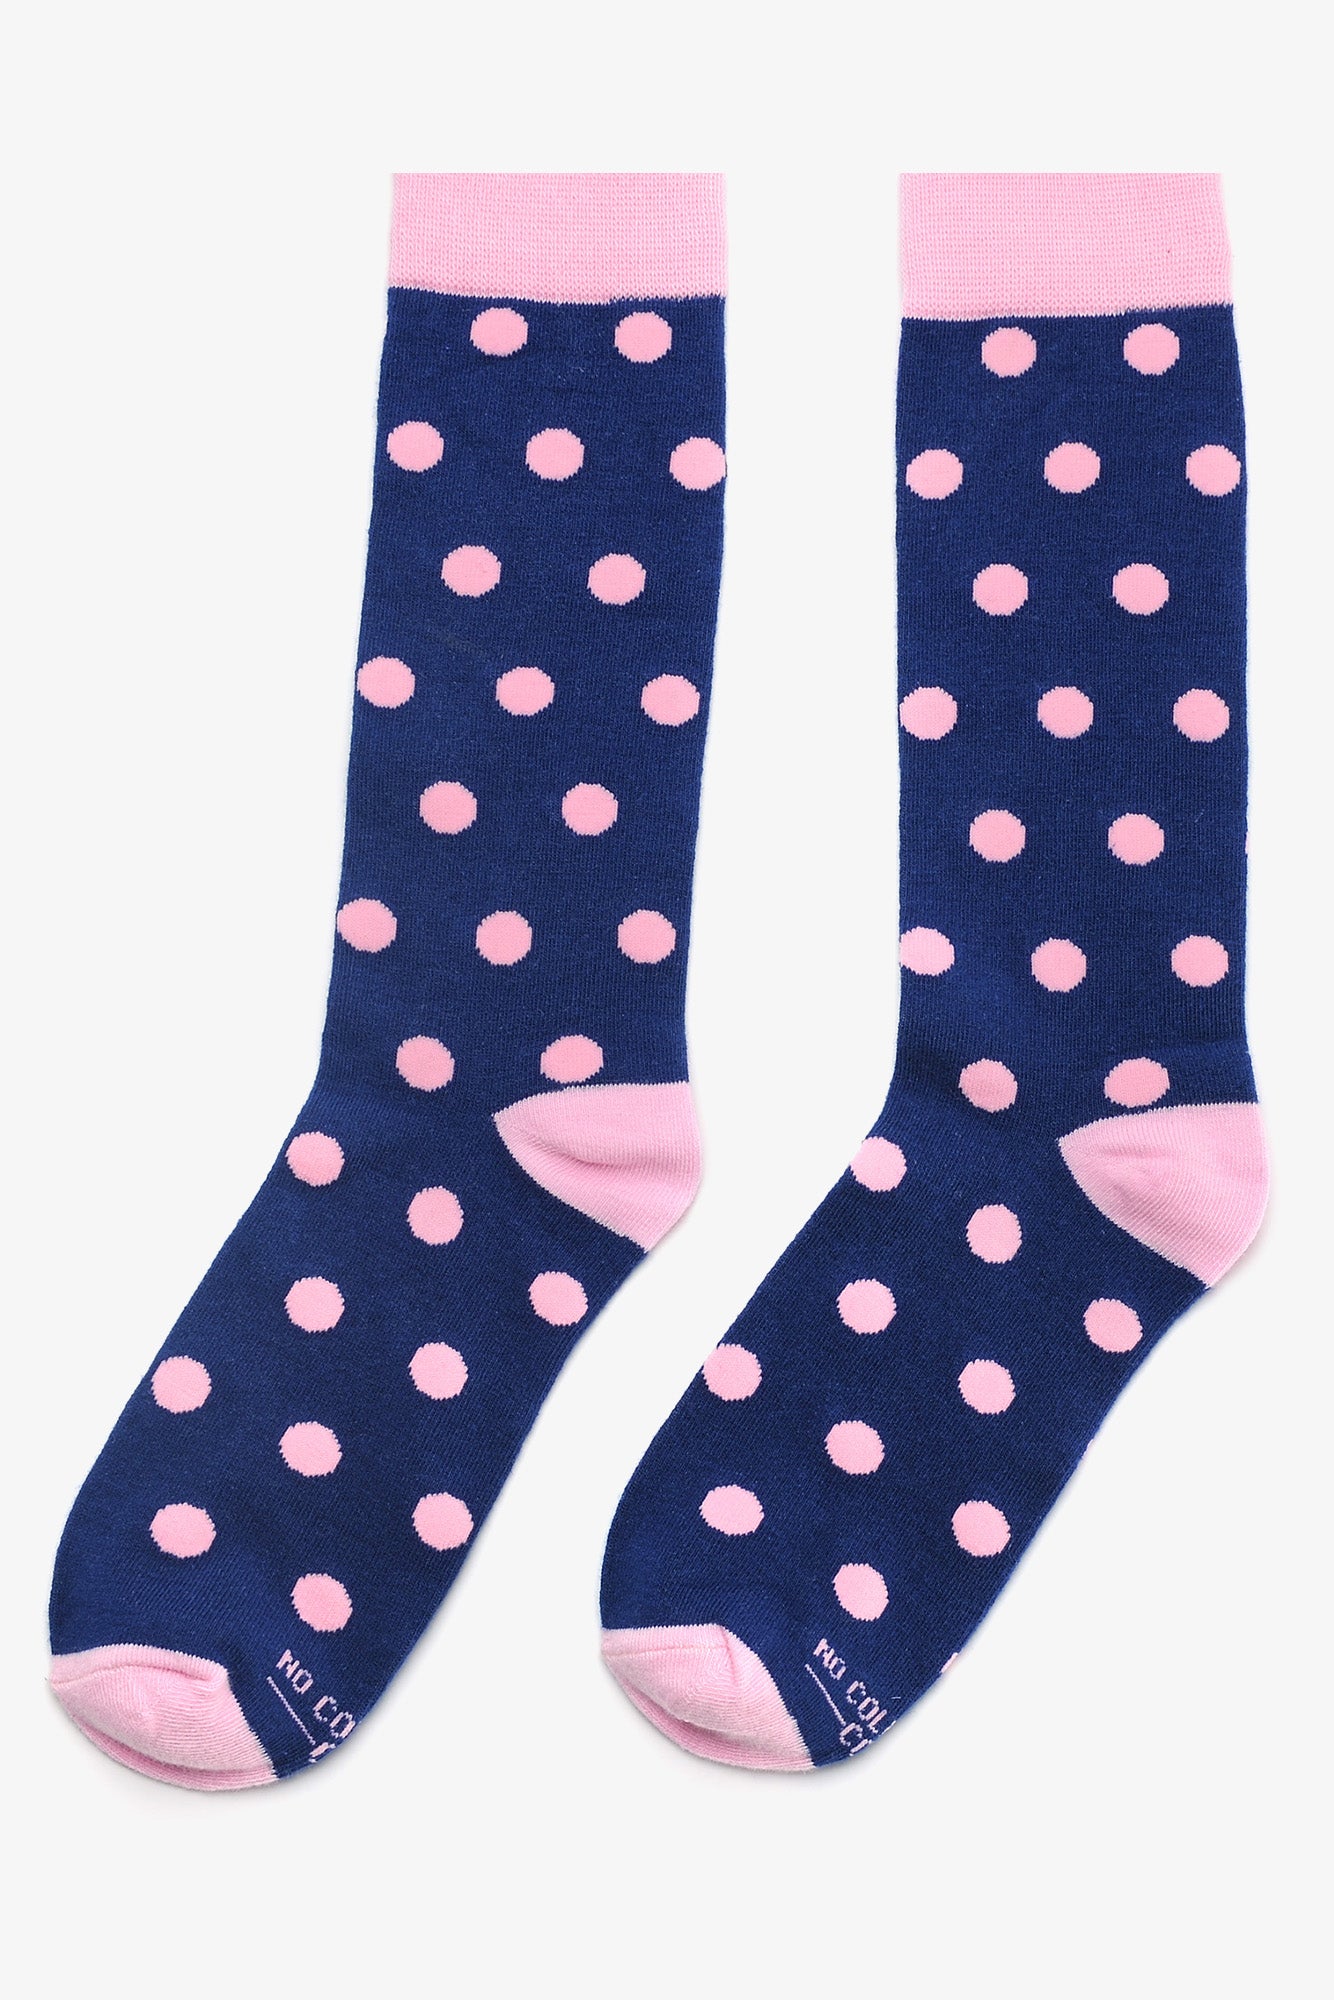 Navy with Pink Polka Dot Groomsmen Socks by No Cold Feet